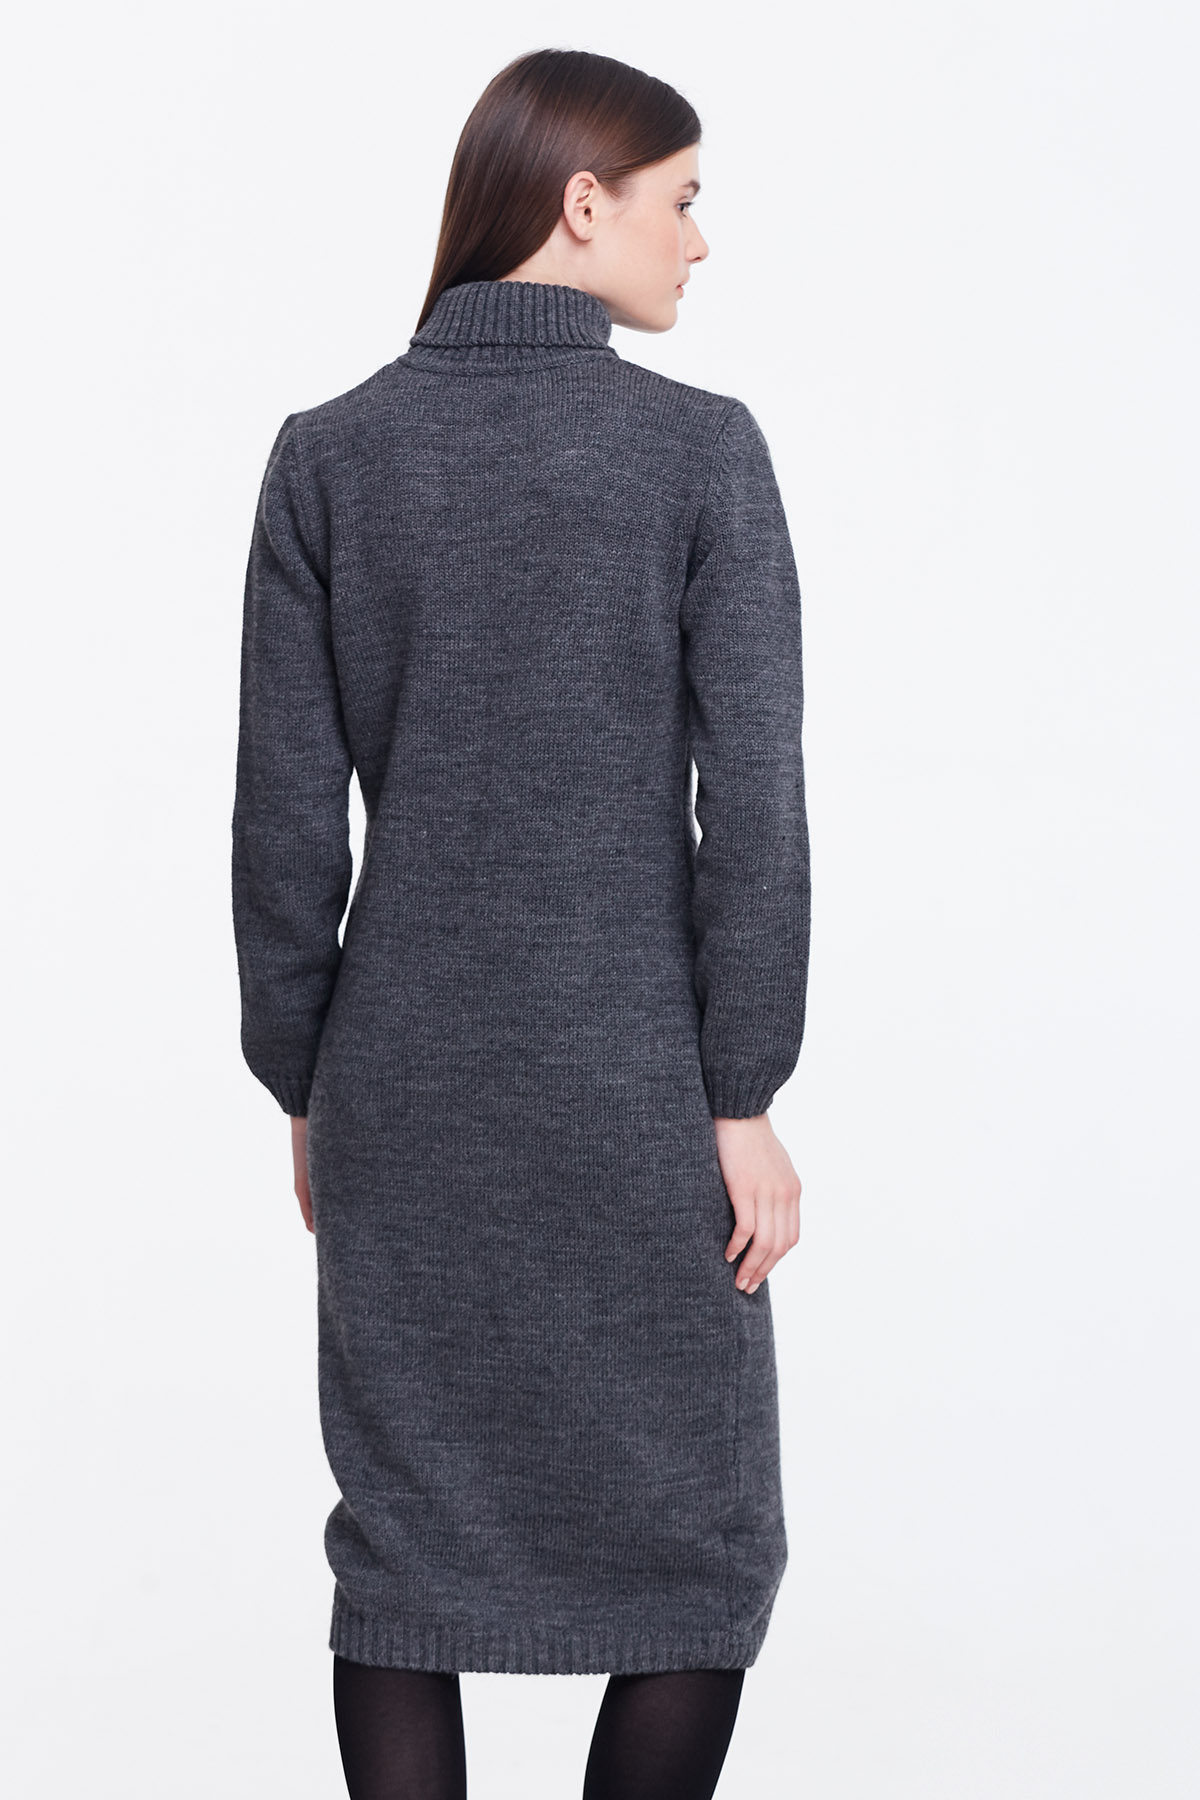 Grey knit dress with a stand up collar, photo 2